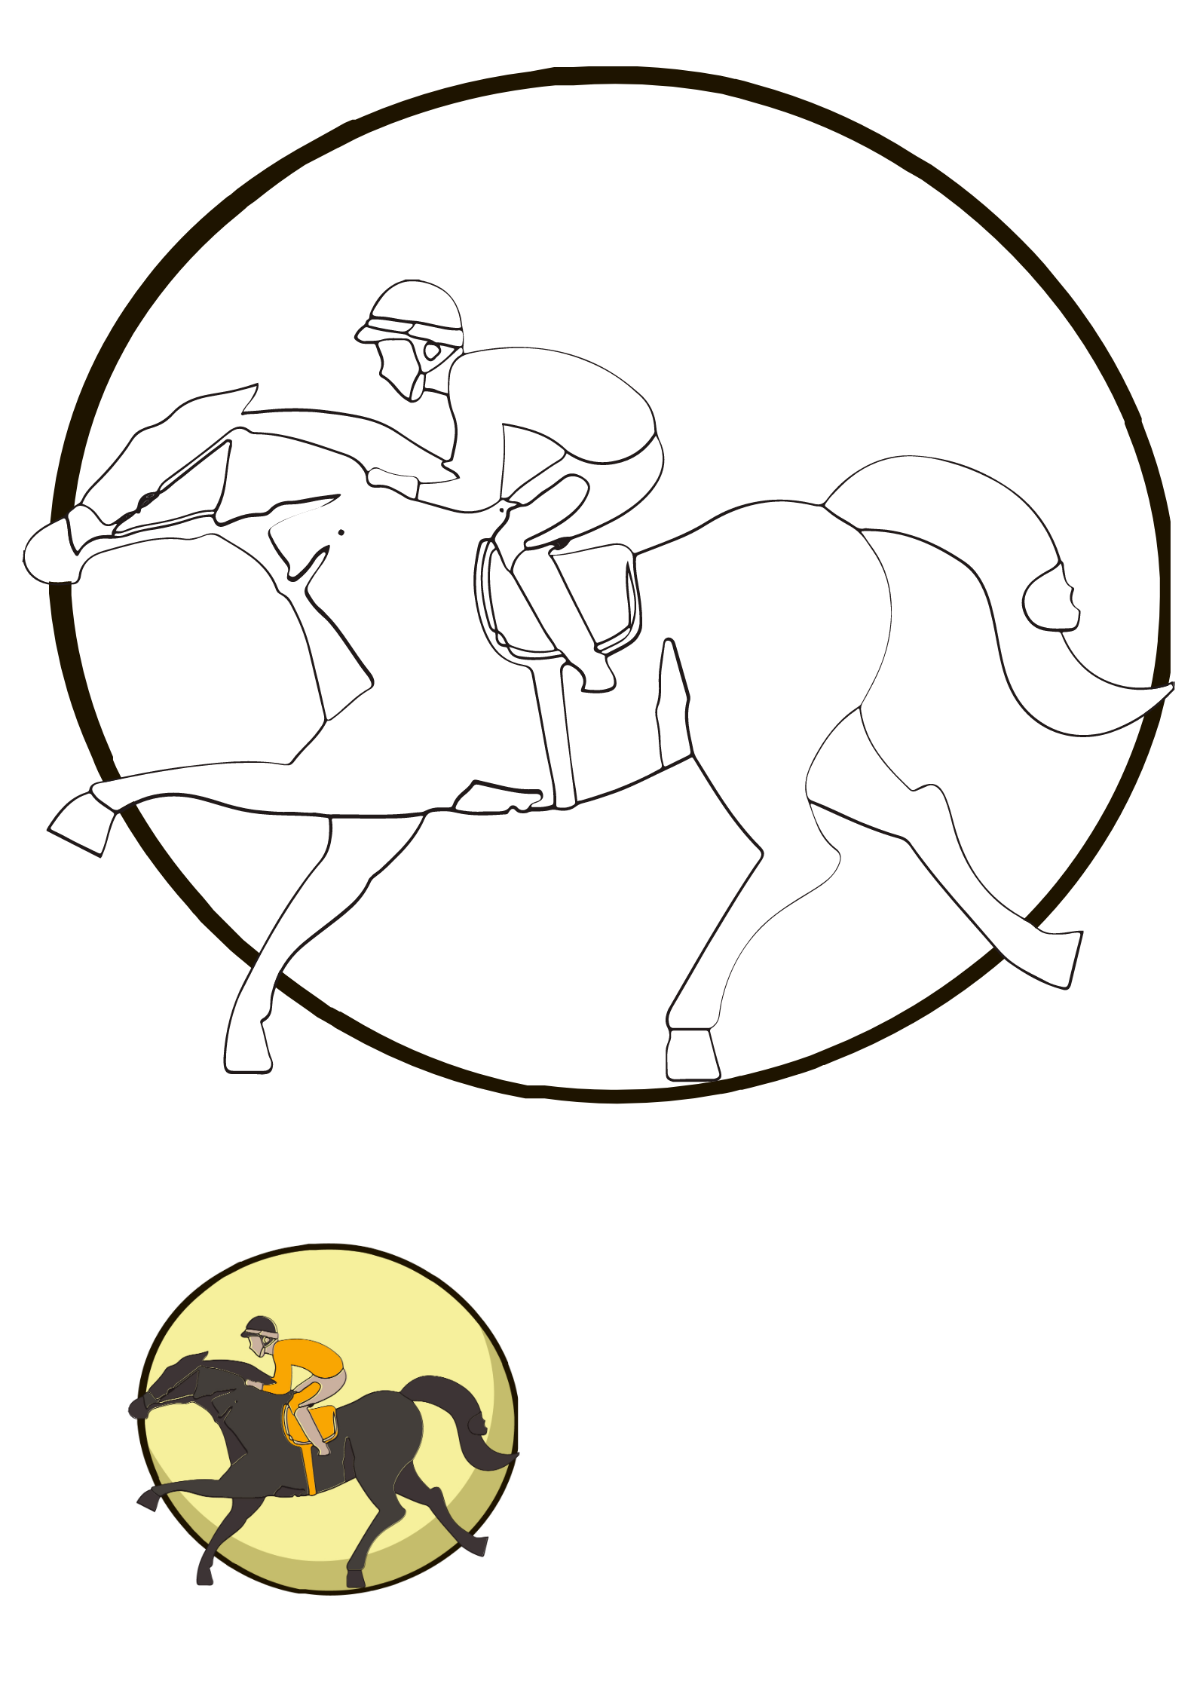 Horse Riding Coloring Page Template